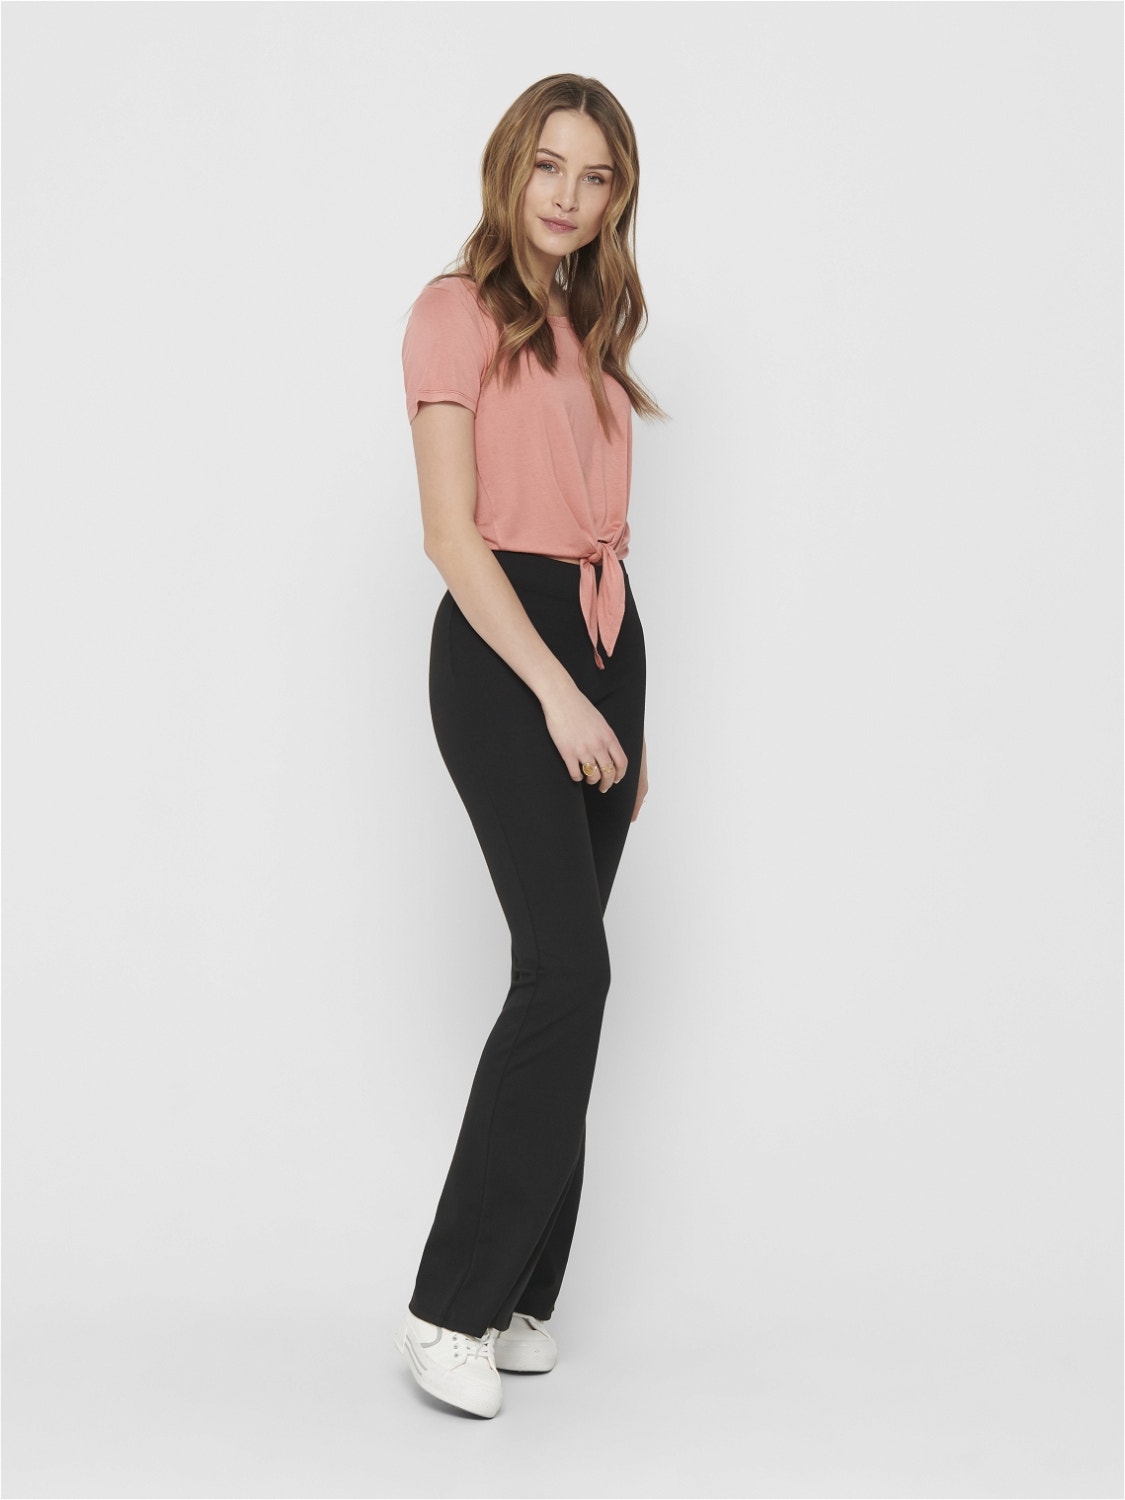 ONLY Flared Trousers -Black - 15213525